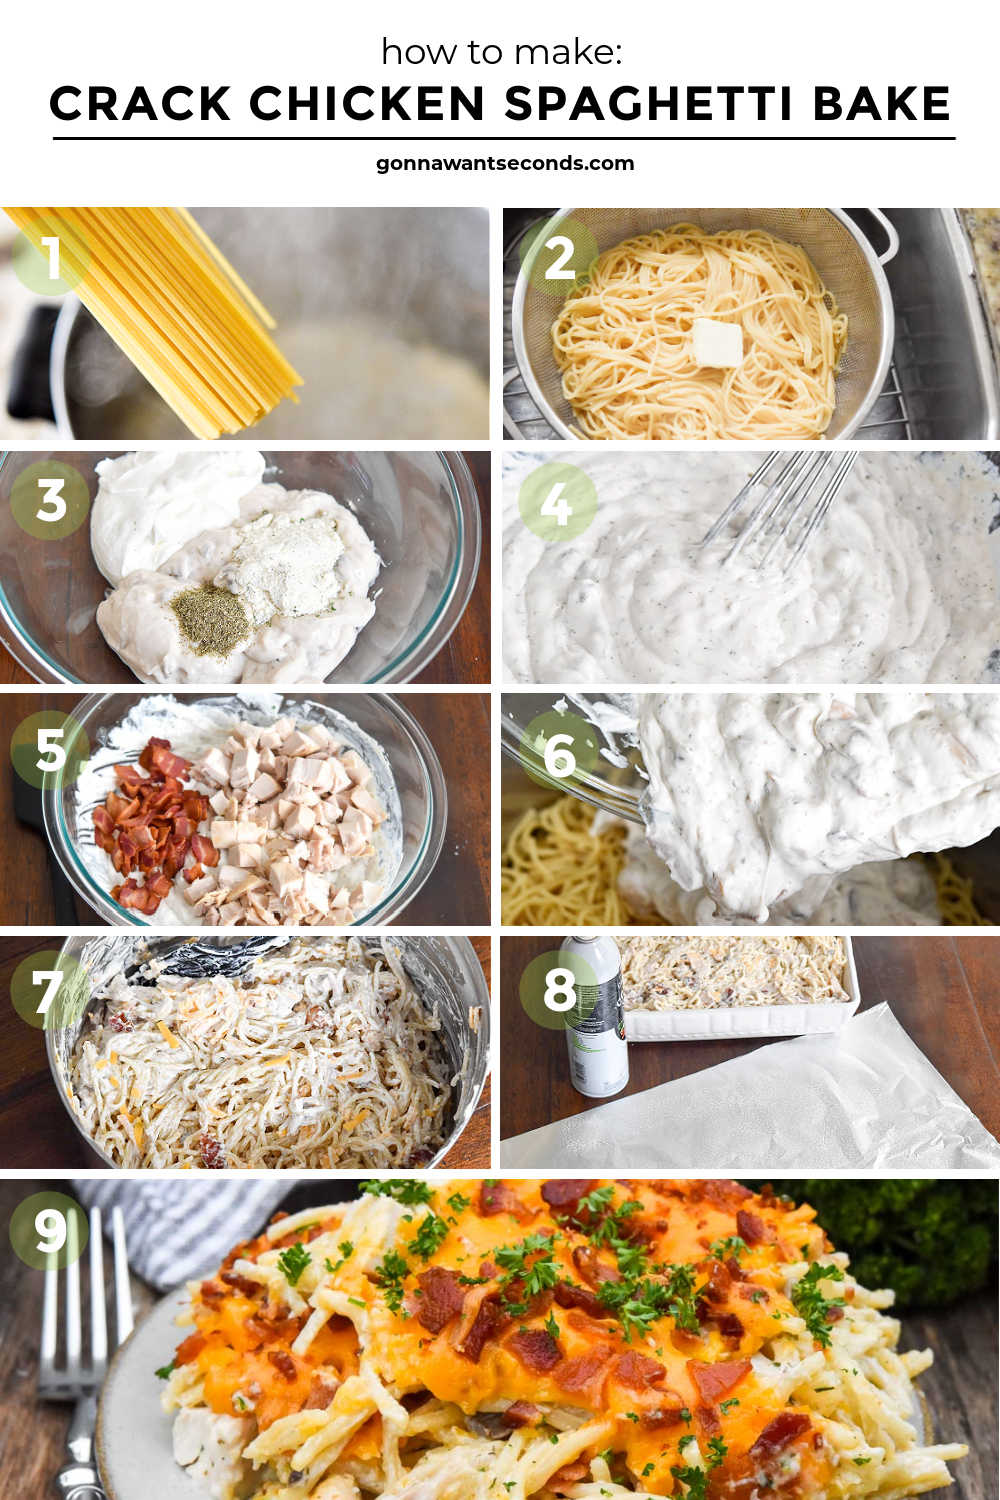 step by step how to make crack chicken spaghetti bake